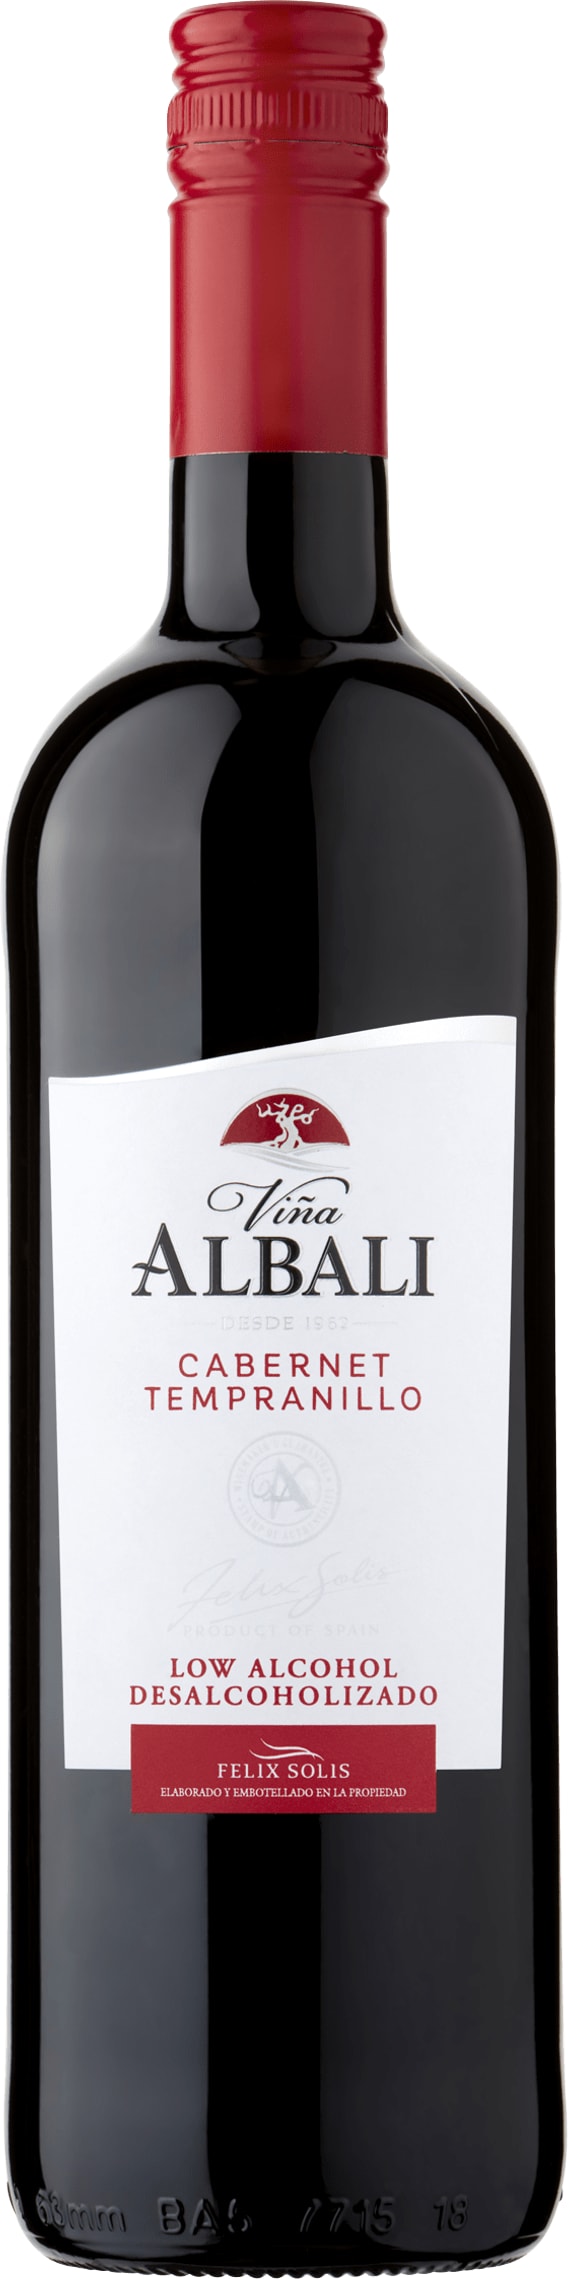 Albali Cabernet Sauvignon Tempranillo Low Alcohol 2022 75cl - Buy Albali Wines from GREAT WINES DIRECT wine shop